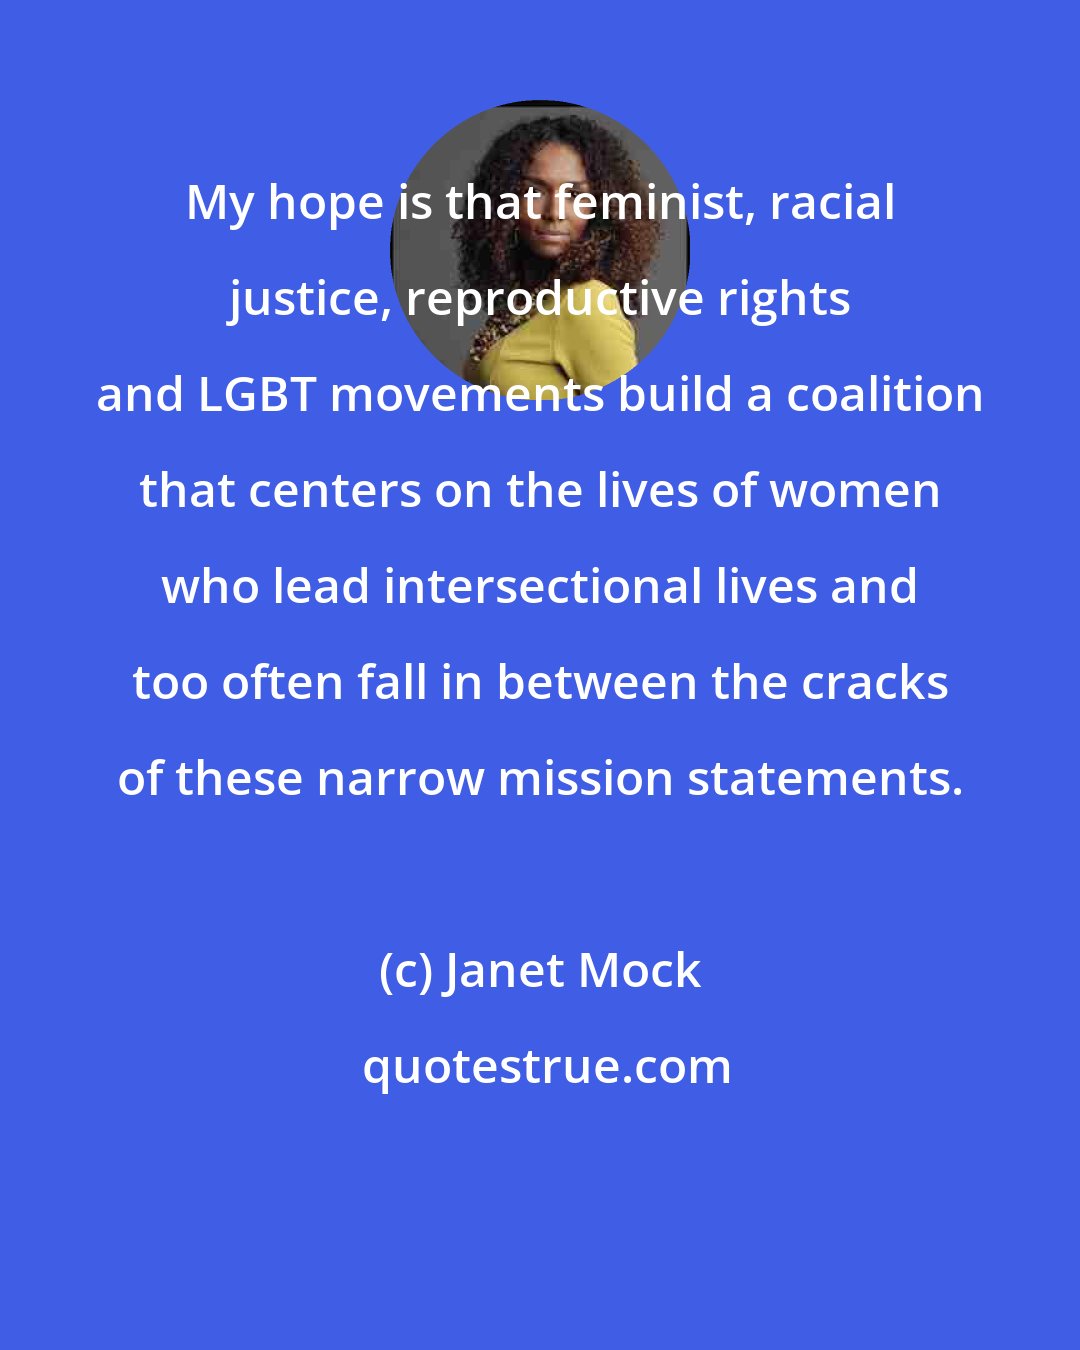 Janet Mock: My hope is that feminist, racial justice, reproductive rights and LGBT movements build a coalition that centers on the lives of women who lead intersectional lives and too often fall in between the cracks of these narrow mission statements.